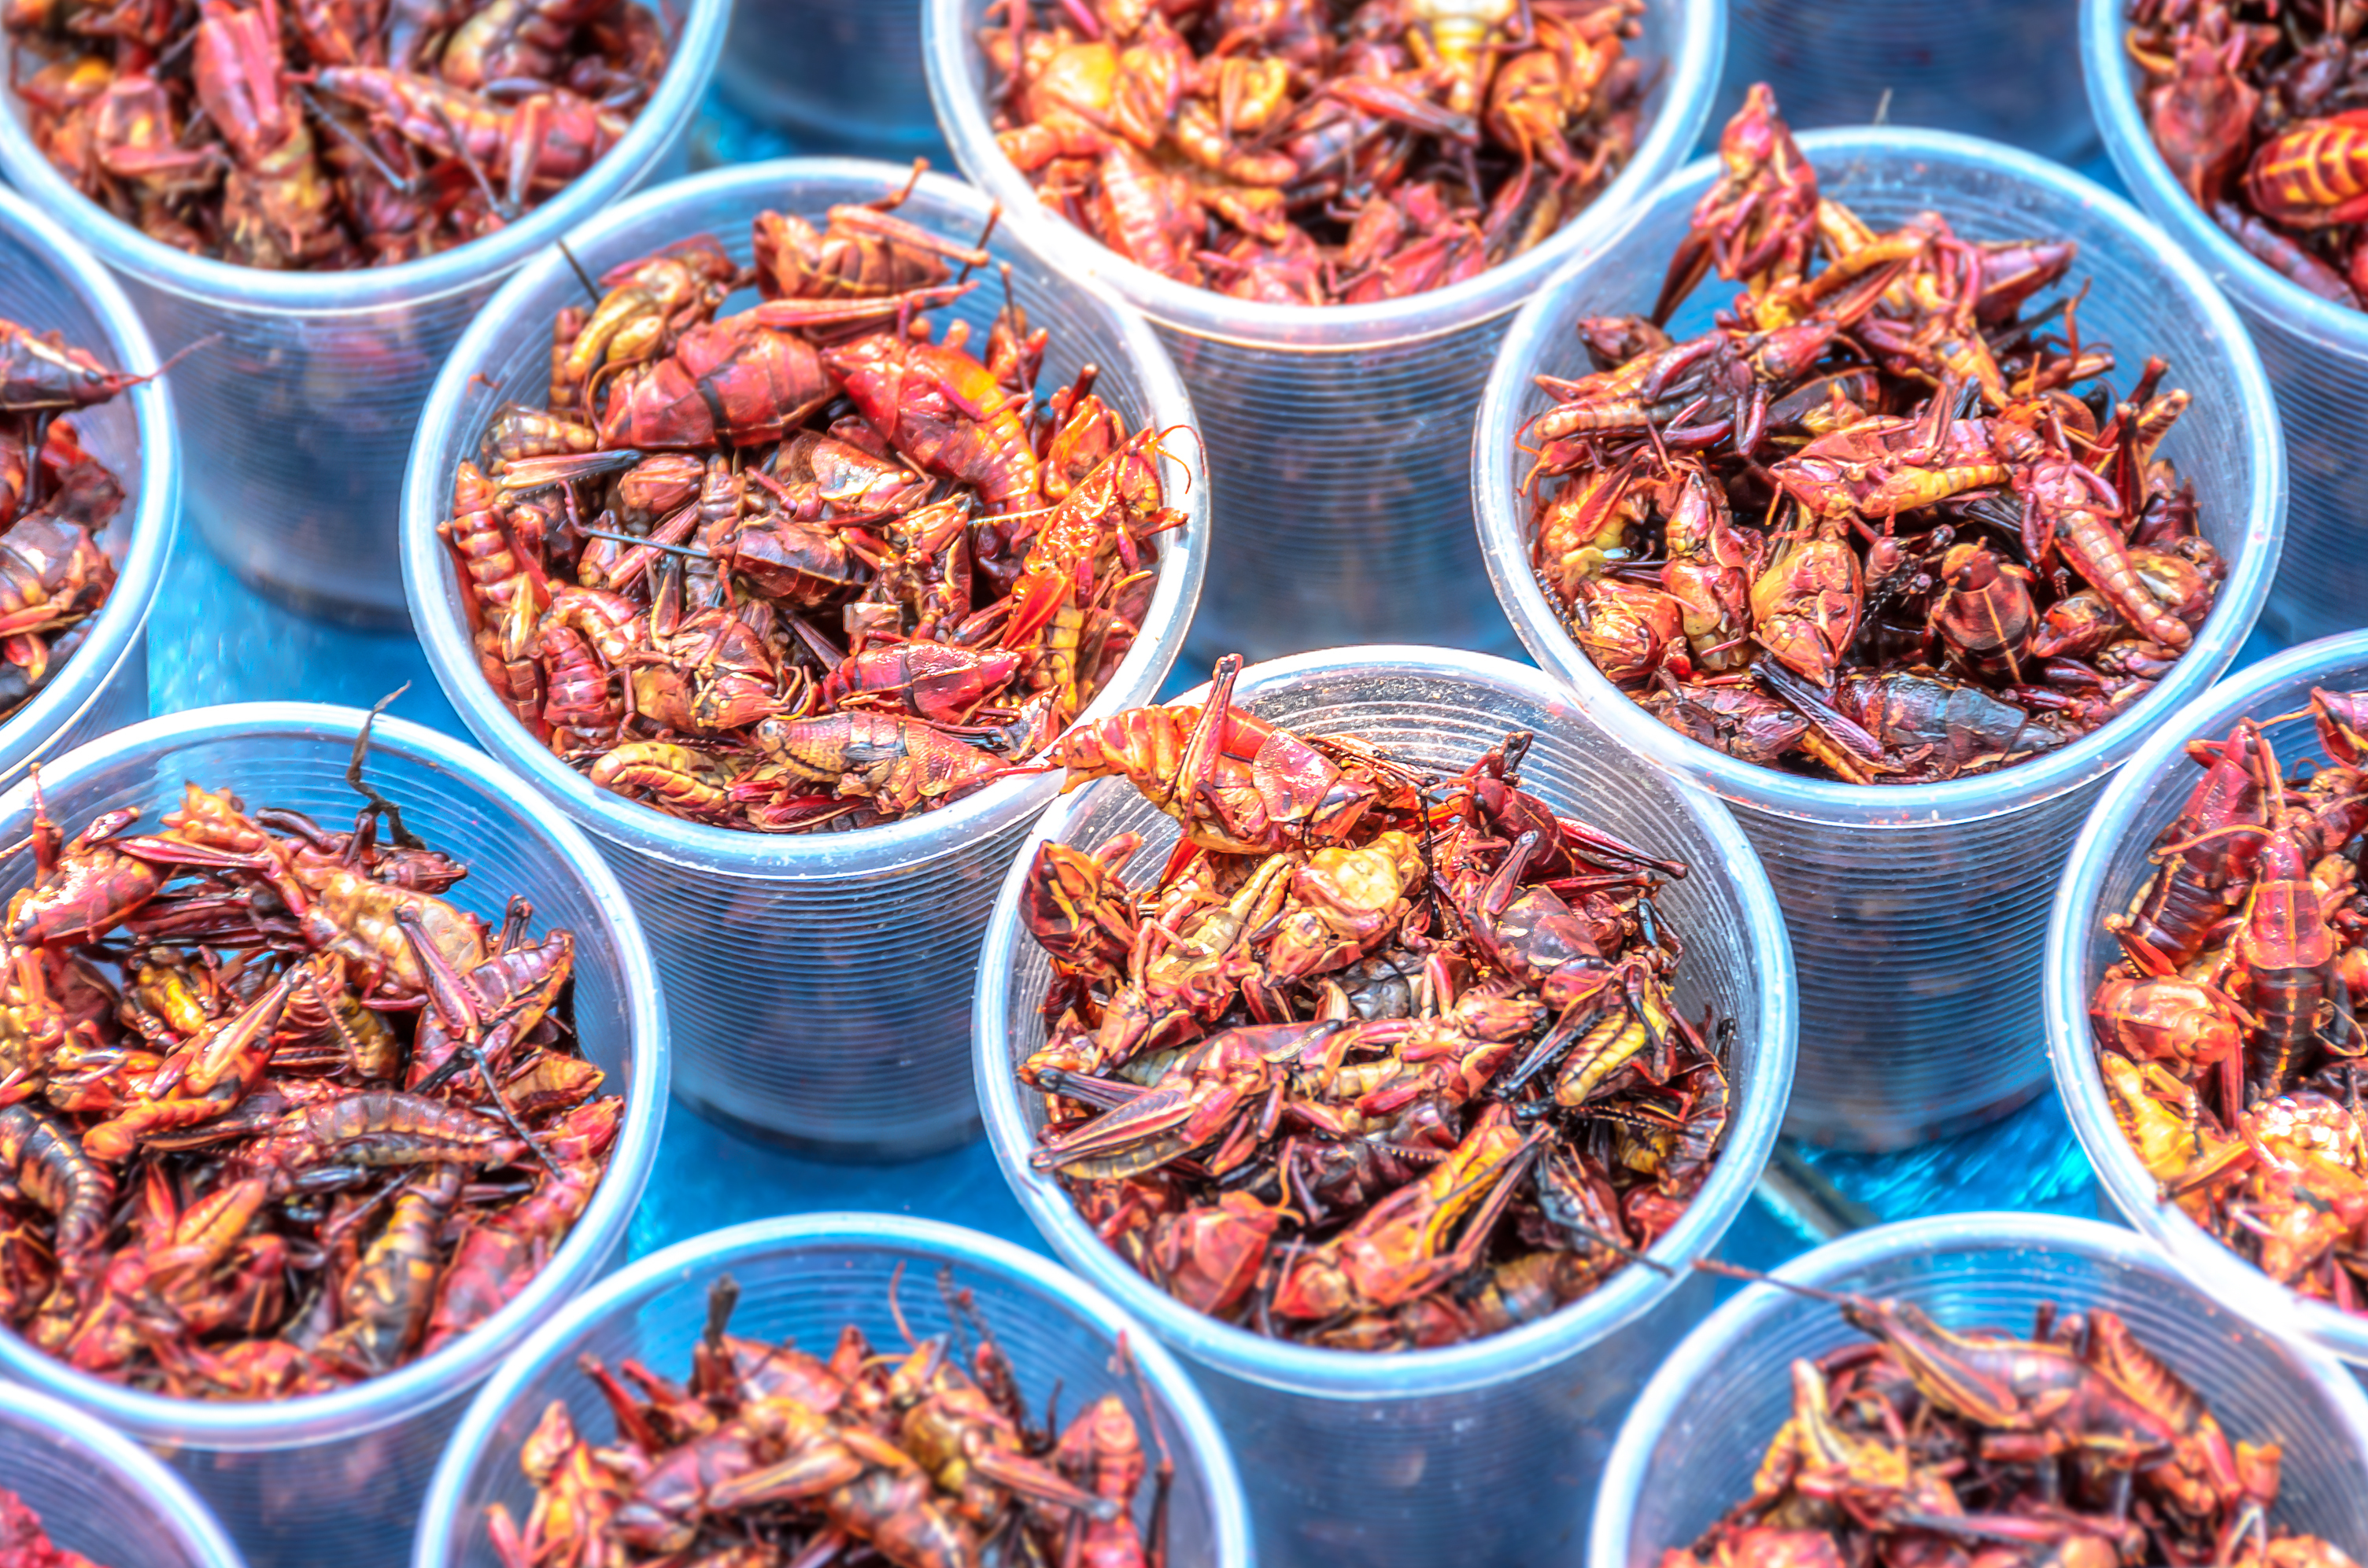 Insects as nutritious foods